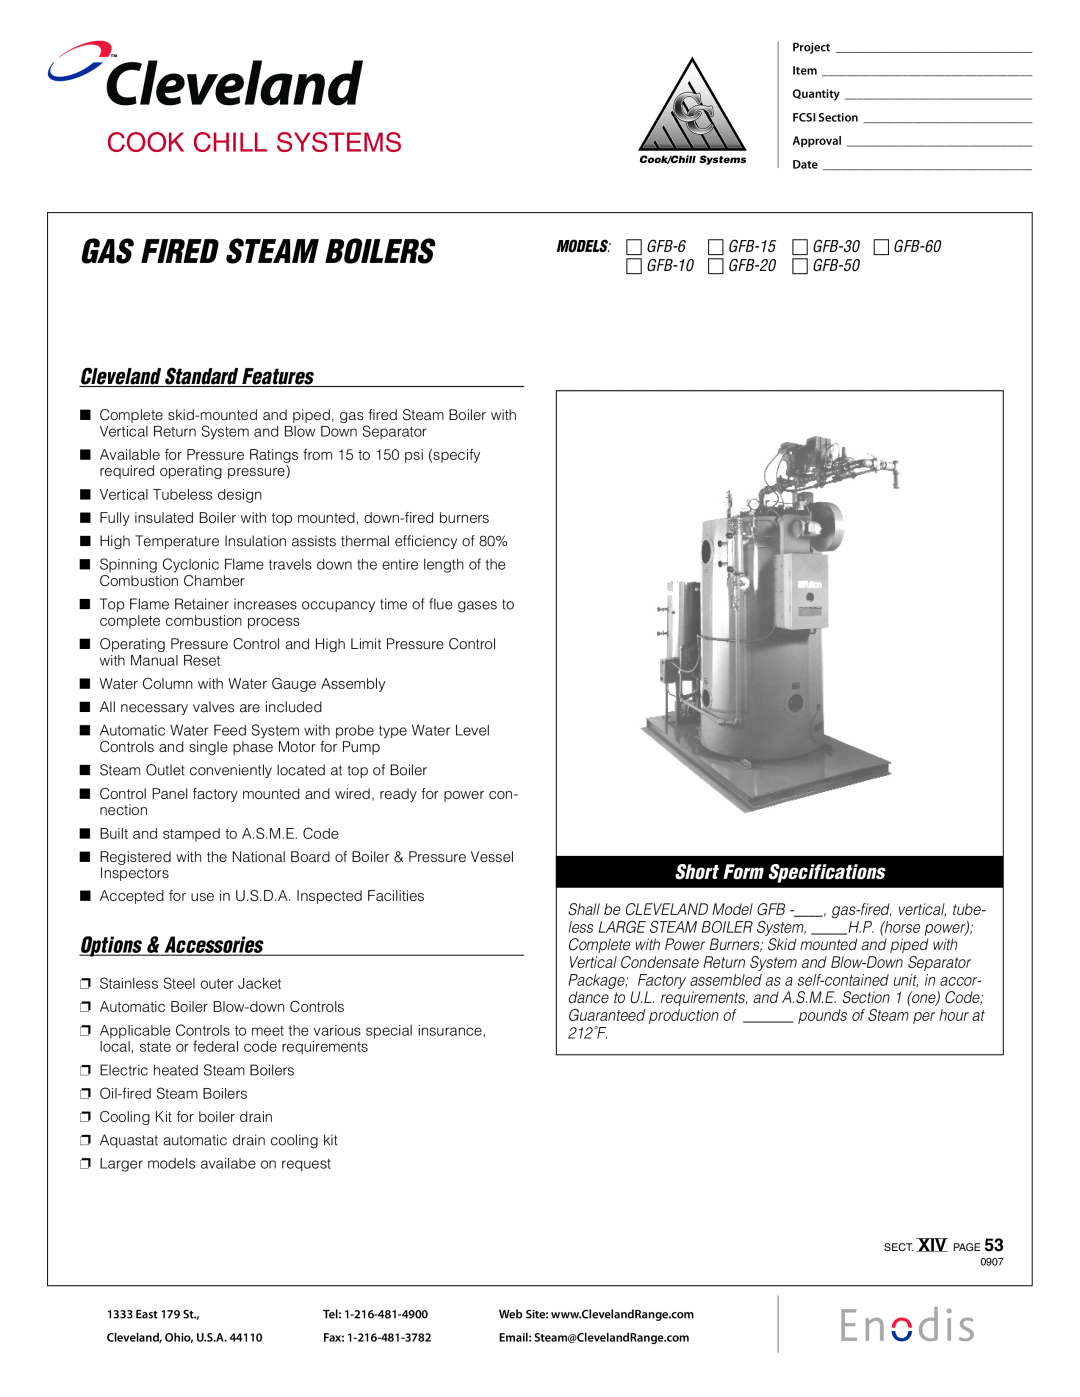 Cleveland Range GFB-60 specifications Gas Fired Steam Boilers, Cook Chill Systems, Cleveland Standard Features 